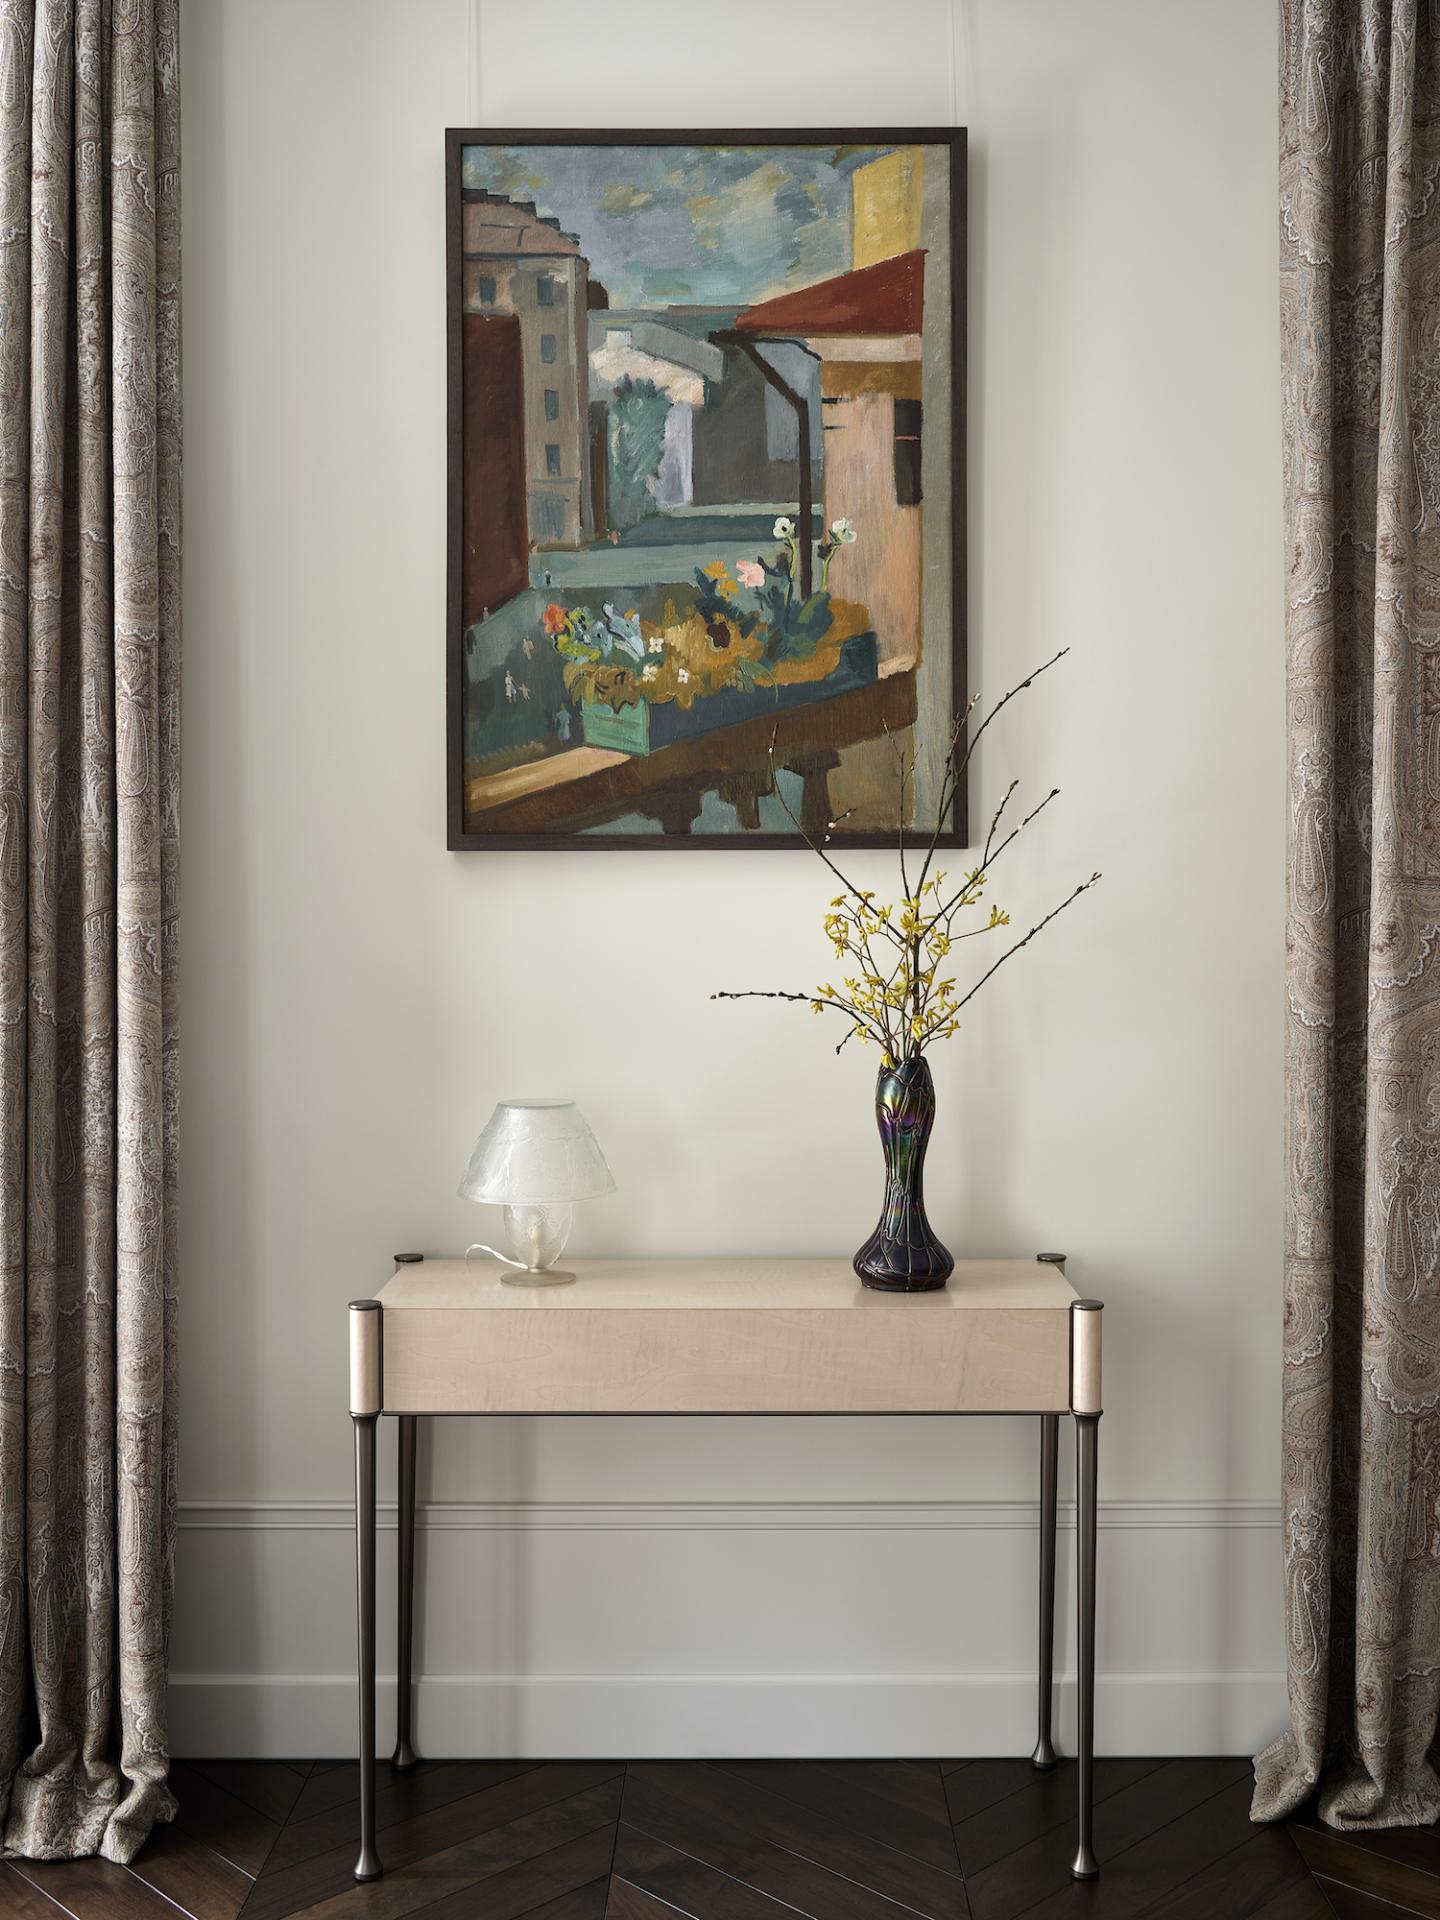 Tour a Home that Doubles as a Gallery for Art Deco Vases